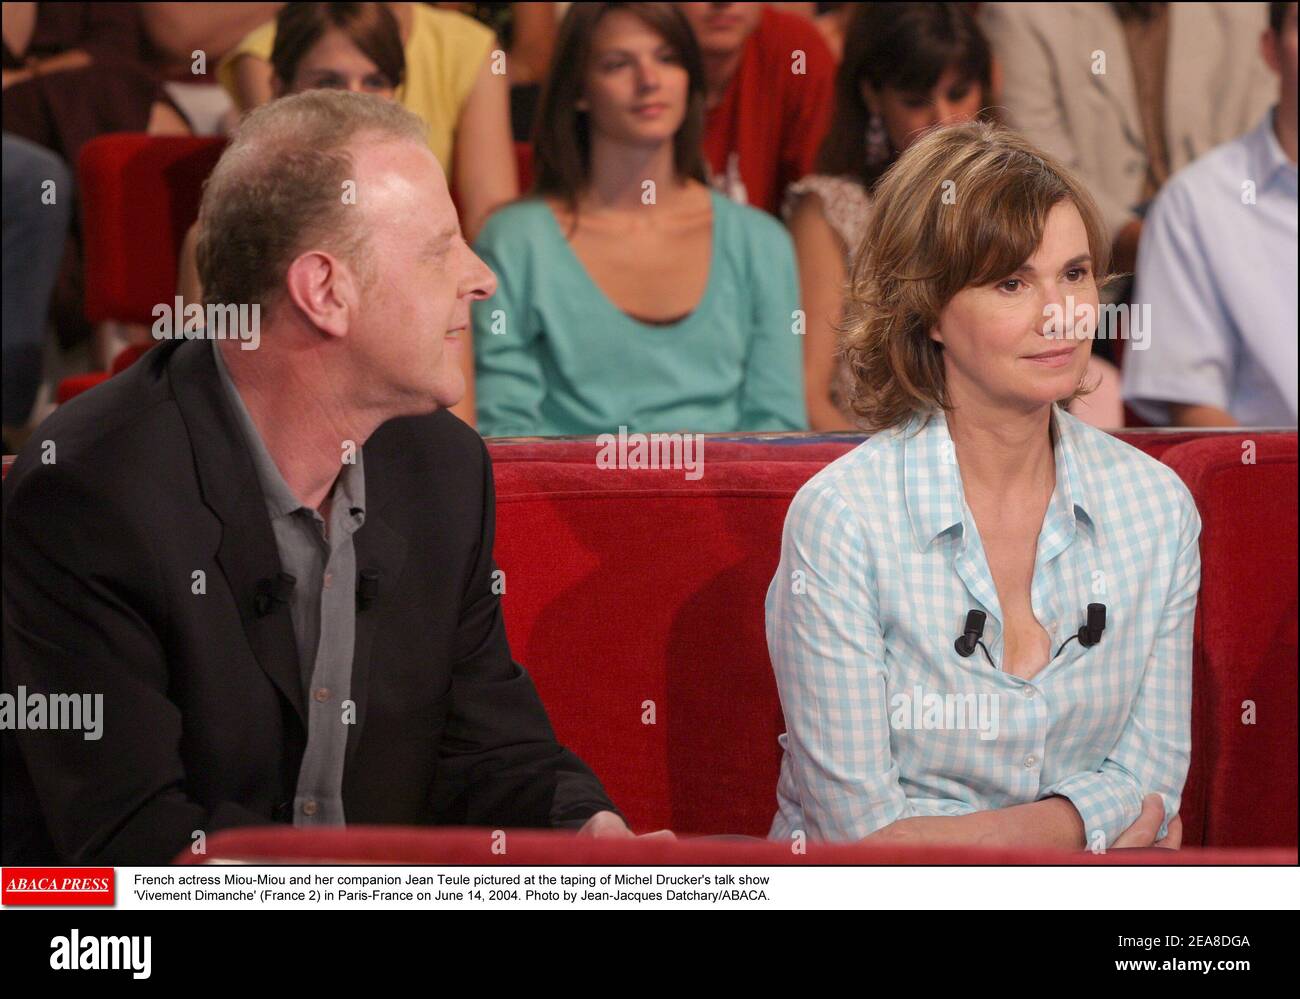 French actress Miou-Miou and her companion Jean Teule pictured at the  taping of Michel Drucker's talk show 'Vivement Dimanche' (France 2) in  Paris-France on June 14, 2004. Photo by Jean-Jacques Datchary/ABACA Stock